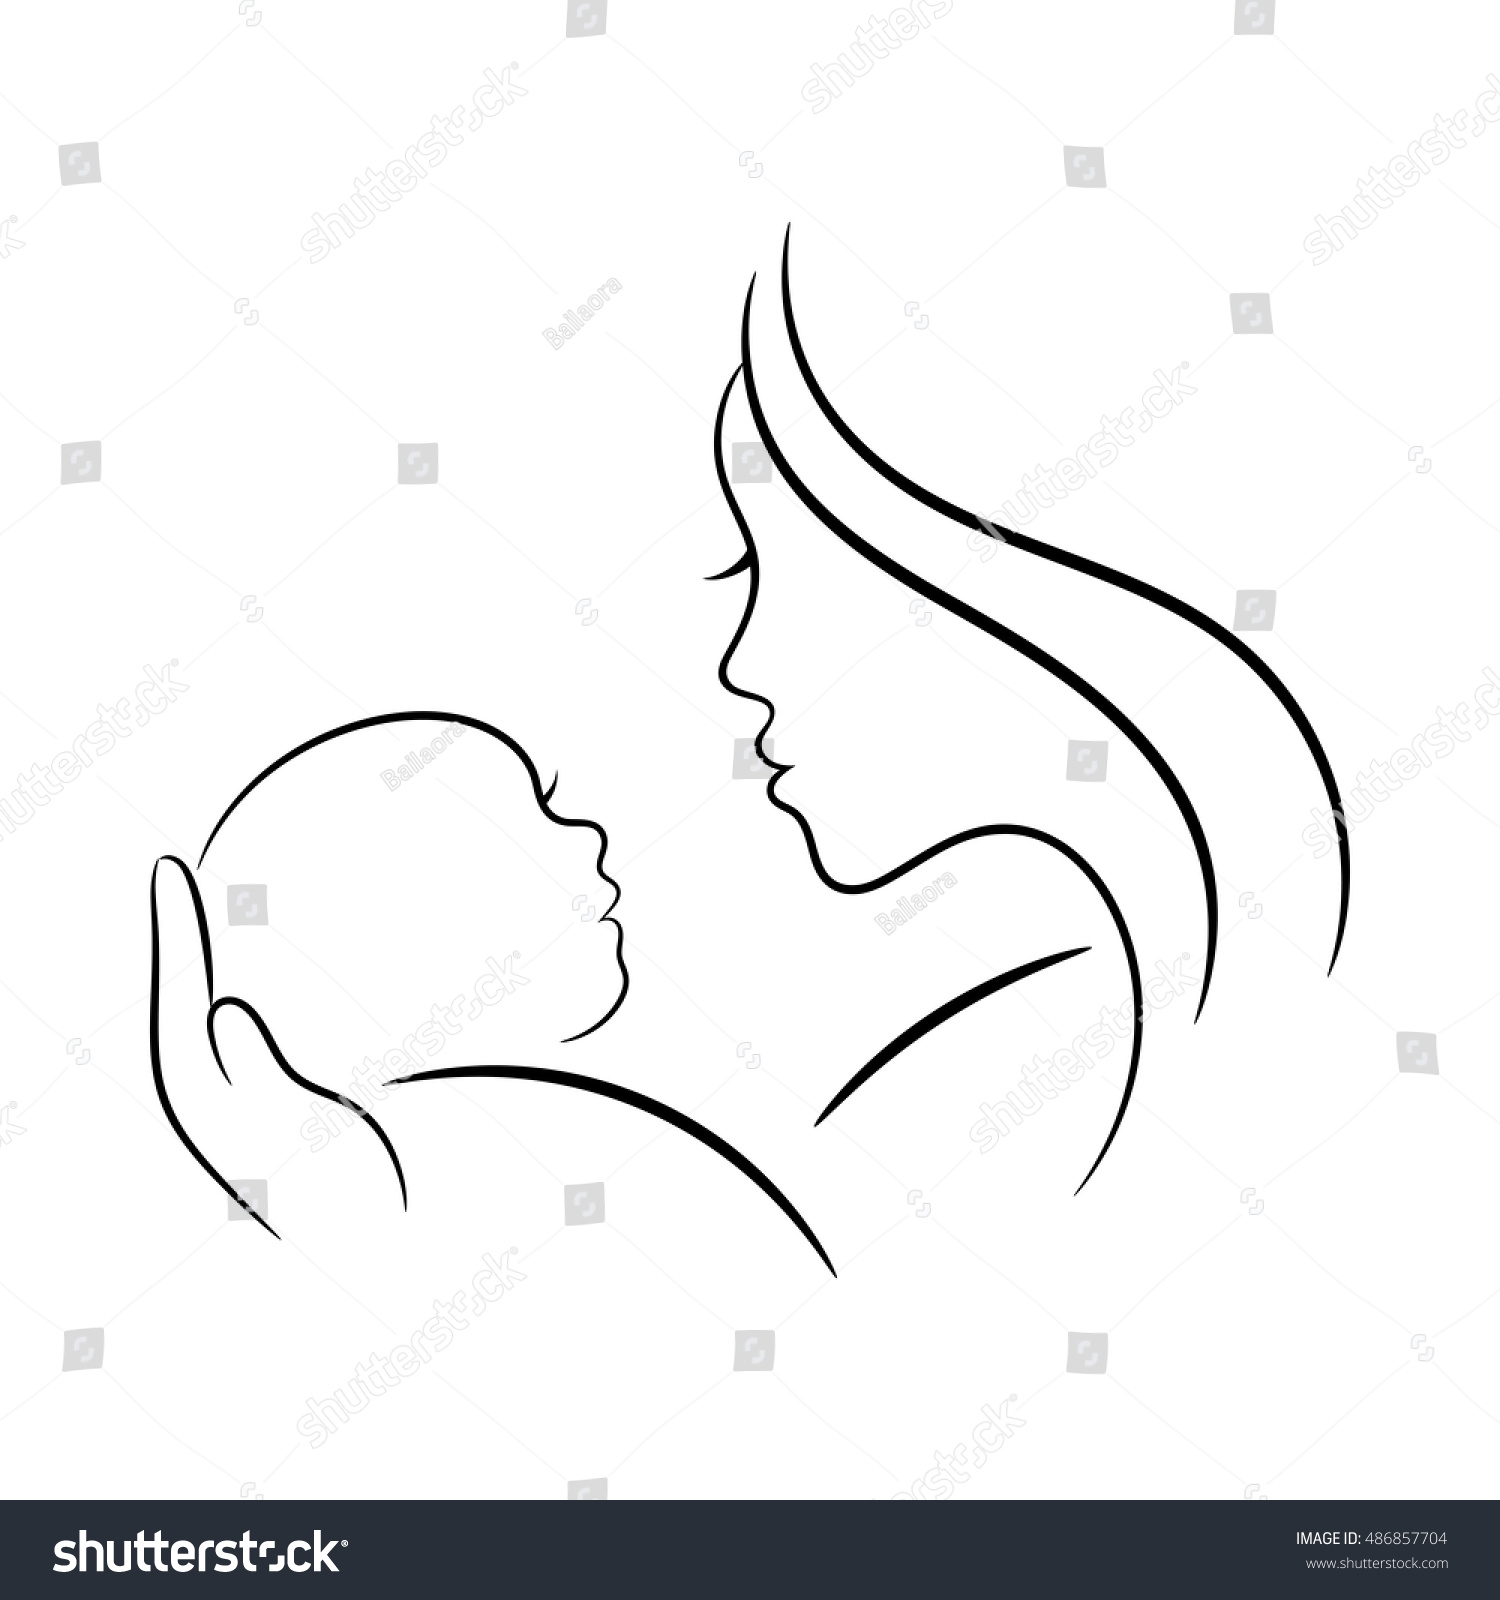 Mother And Baby Contour Illustration - 486857704 : Shutterstock